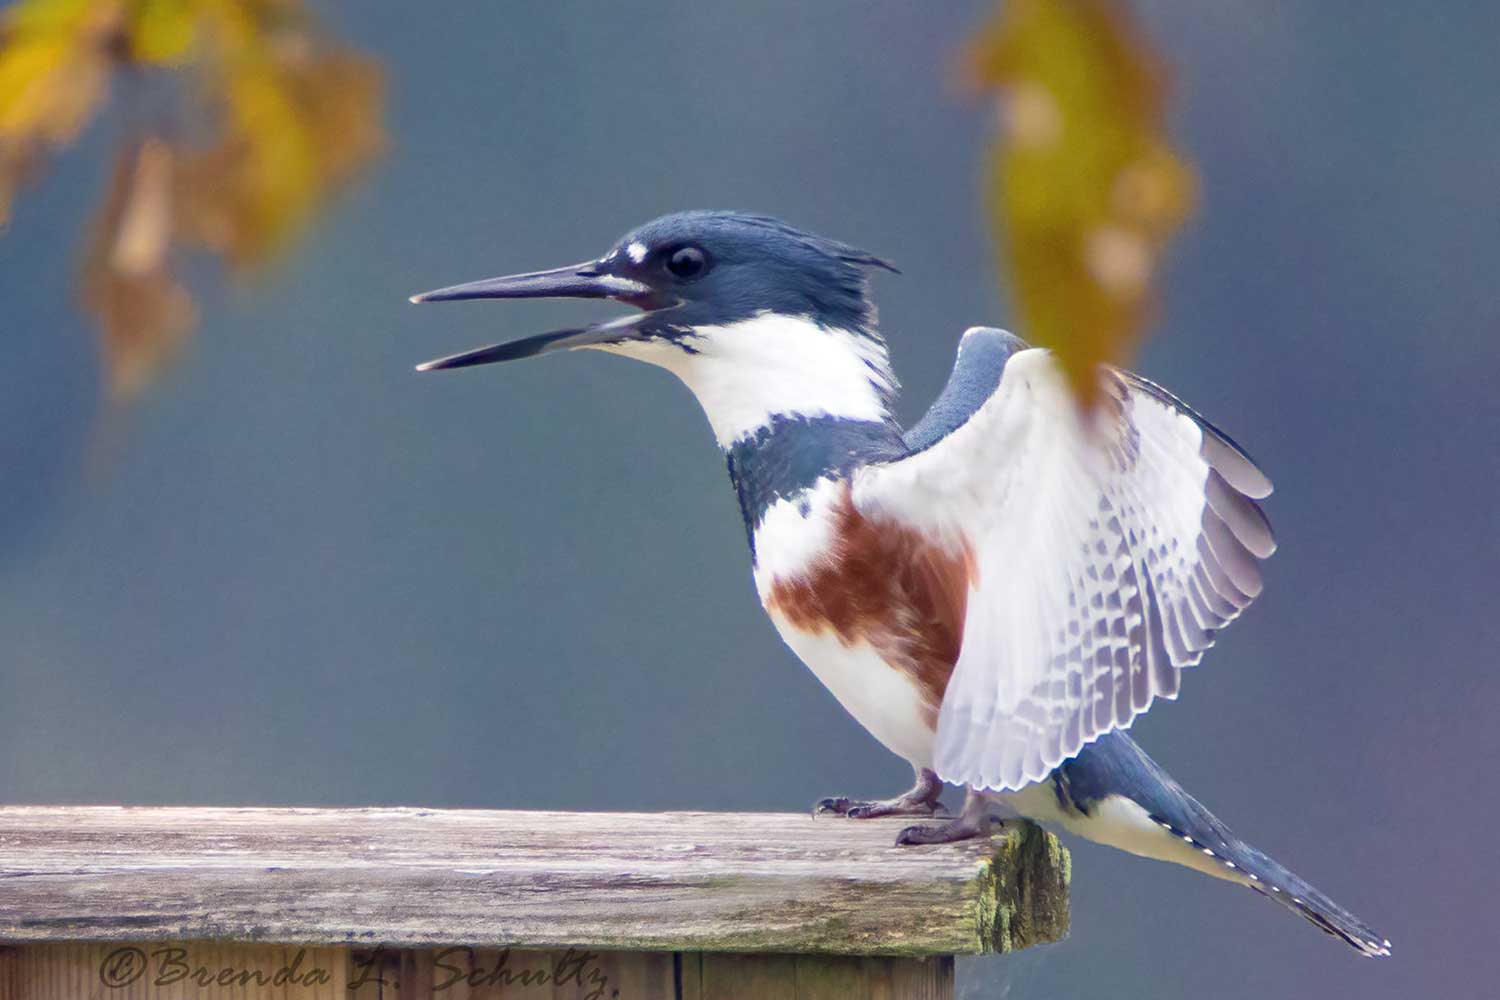 A belted kingfisher with its mouth open.